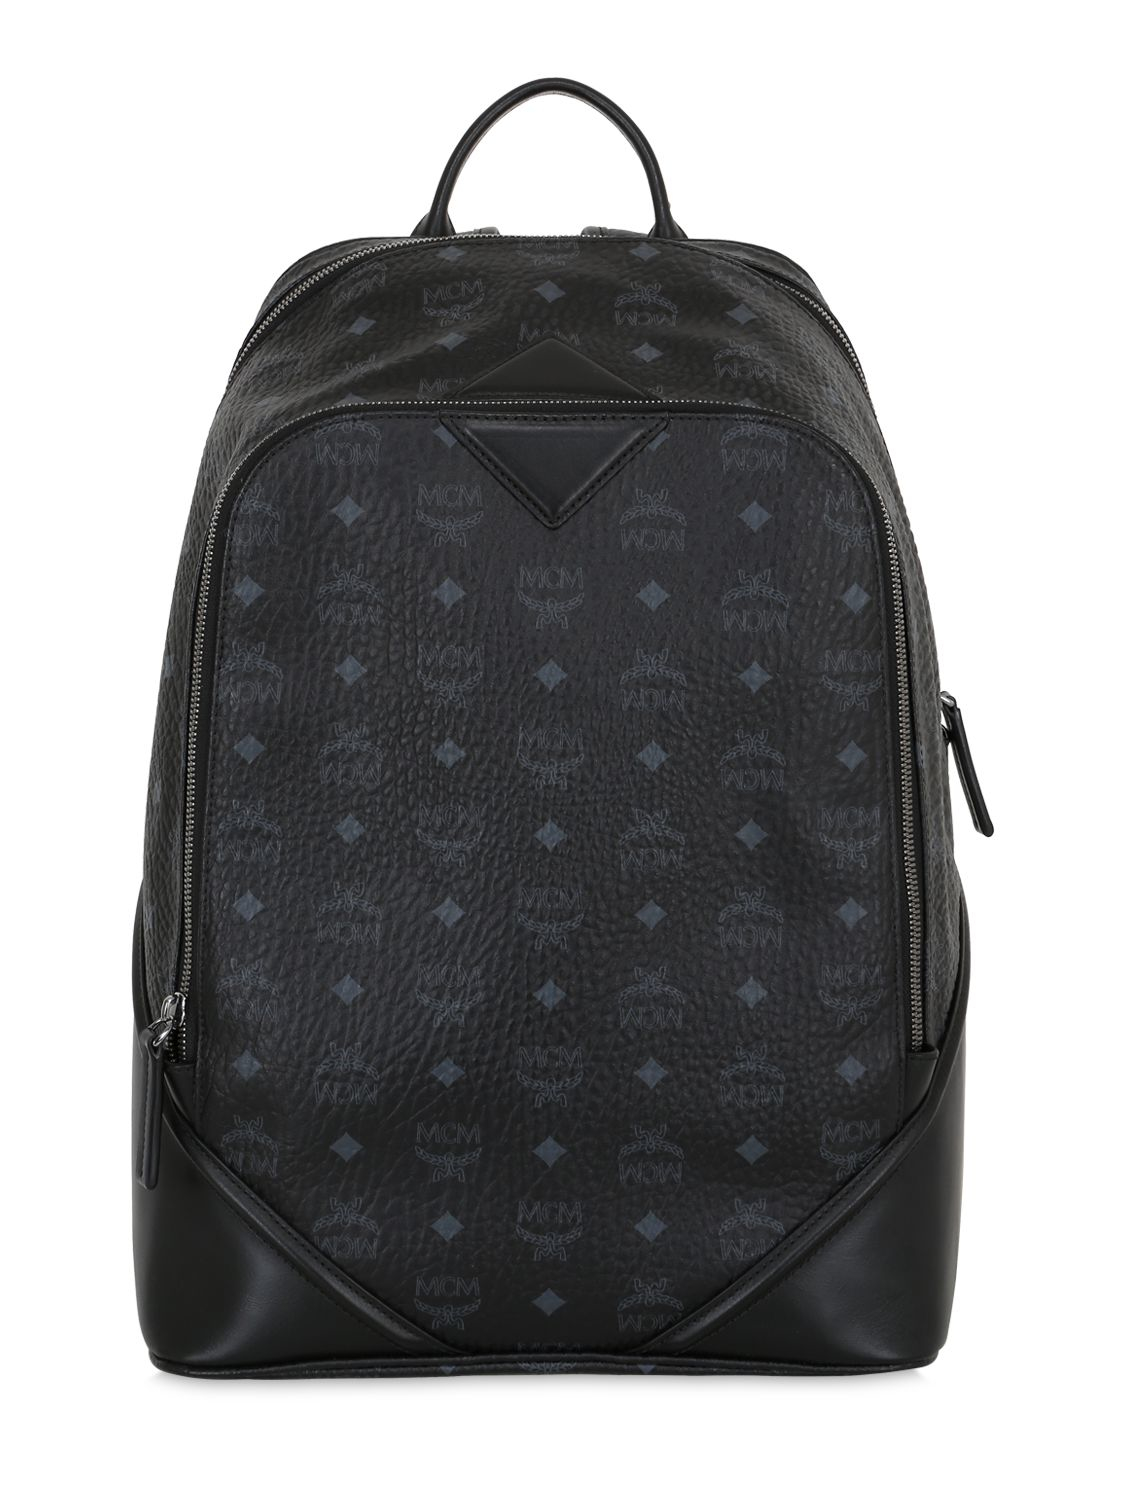 Mcm Leather Backpack Black | IUCN Water